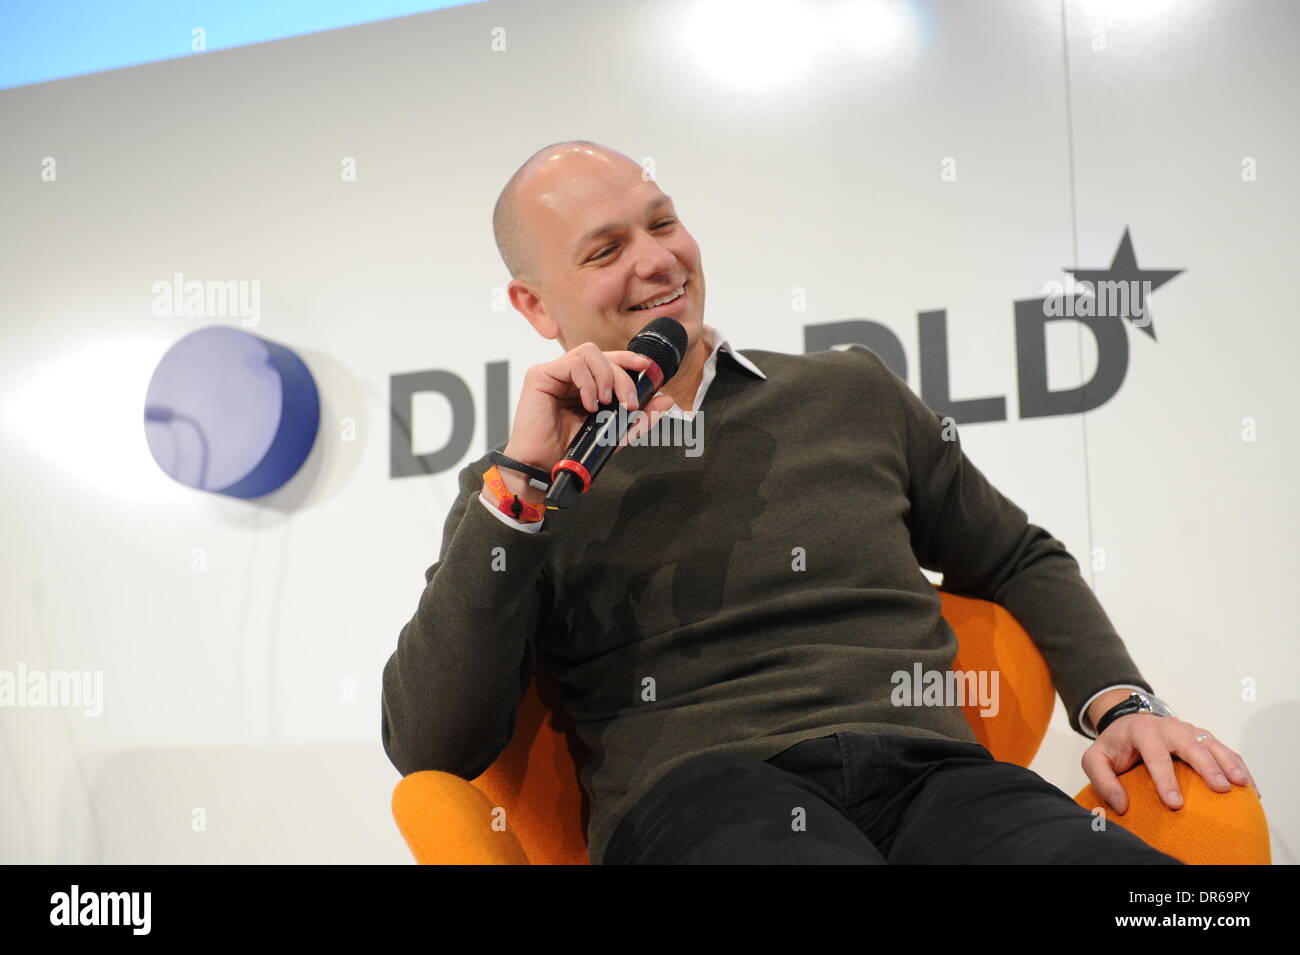 Munich, Germany. 20th Jan, 2014. MUNICH/GERMANY - JANUARY 20: Tony Fadell (Nest Labs) laughs on a panel discussion during the Digital Life Design (DLD) Conference at the HVB Forum on January 20, 2014 in Munich, Germany. DLD is a global network on innovation, digitization, science and culture which connects business, creative and social leaders, opinion-formers and influencers for crossover conversation and inspiration. (Photo: picture alliance / Jan Haas)/dpa/Alamy Live News Stock Photo